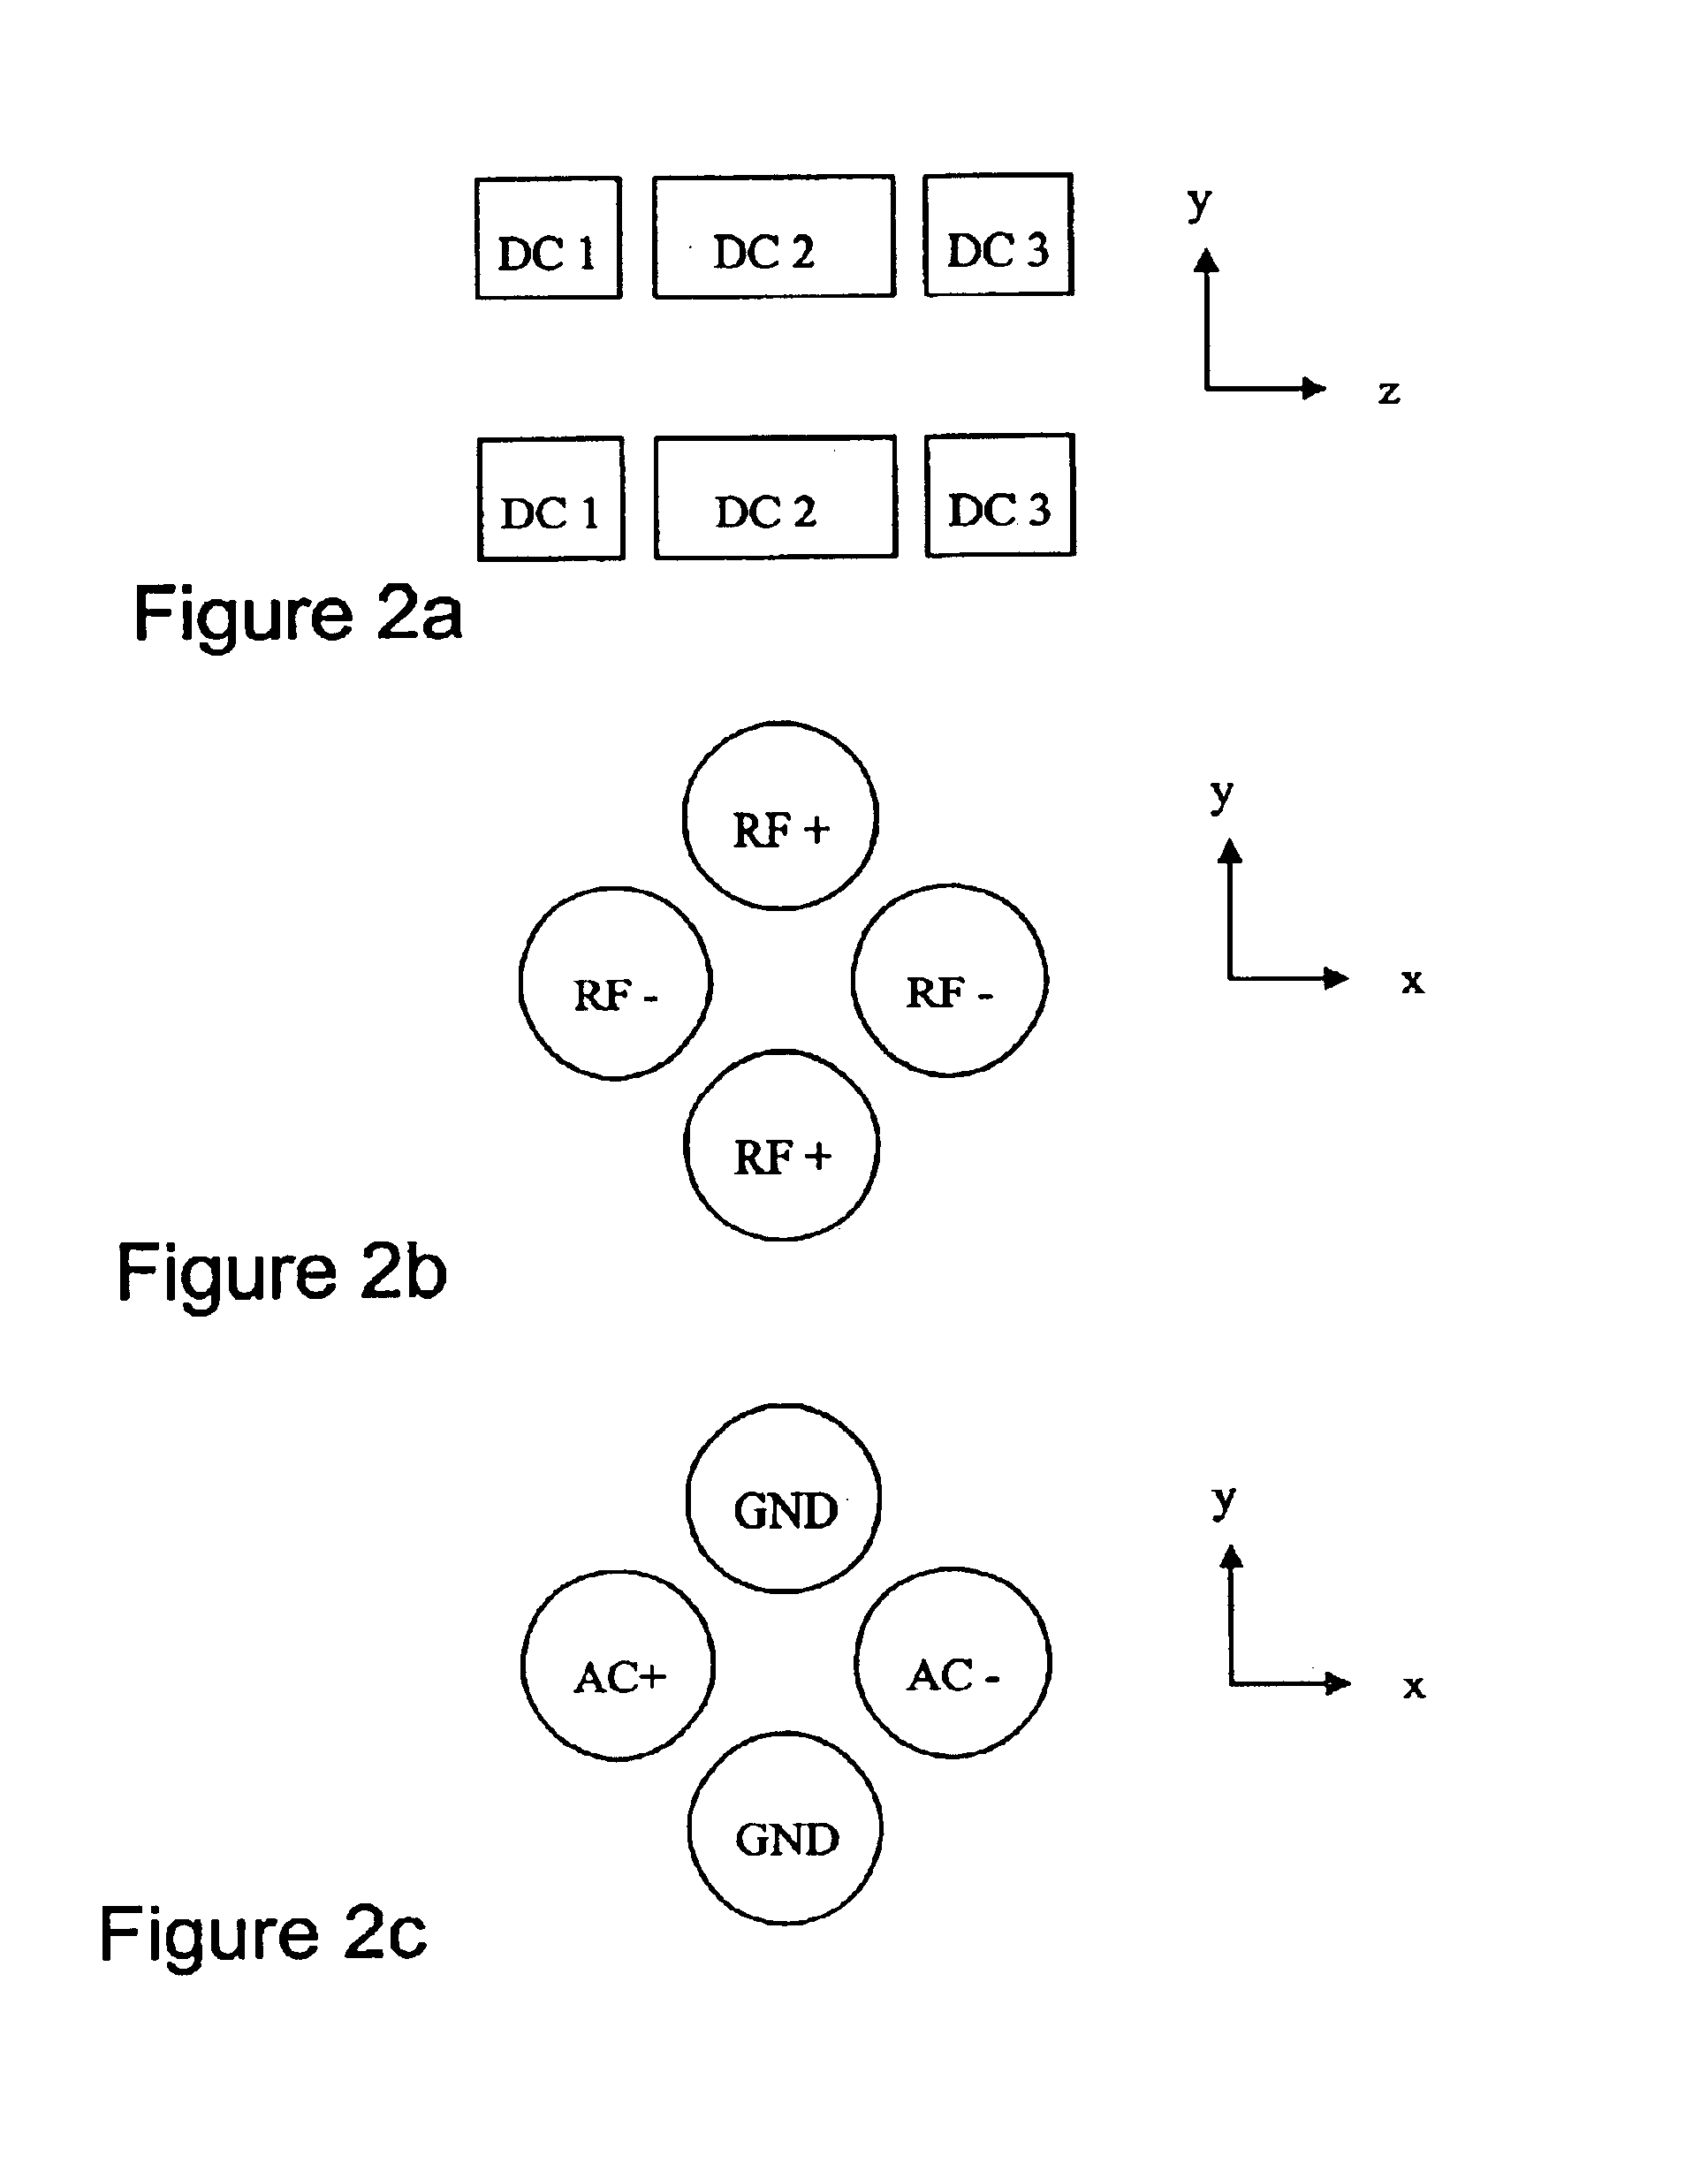 Circuit for applying supplementary voltages to RF multipole devices